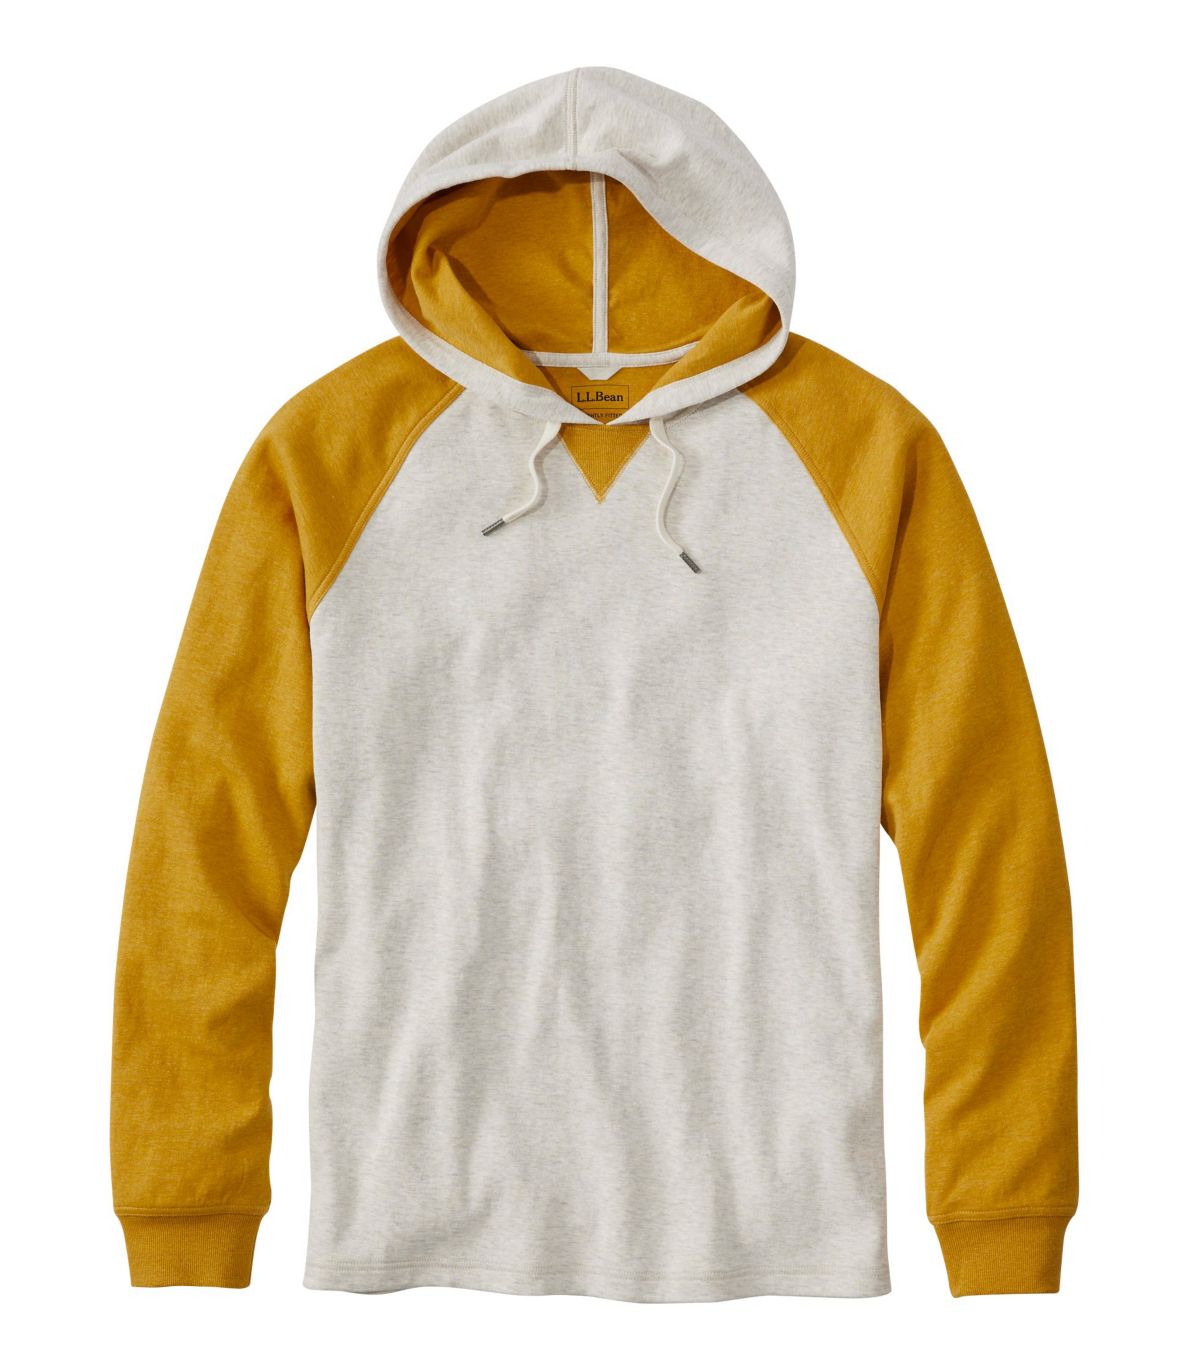 Men's Washed Cotton Double-Knit Hoodie, Colorblock